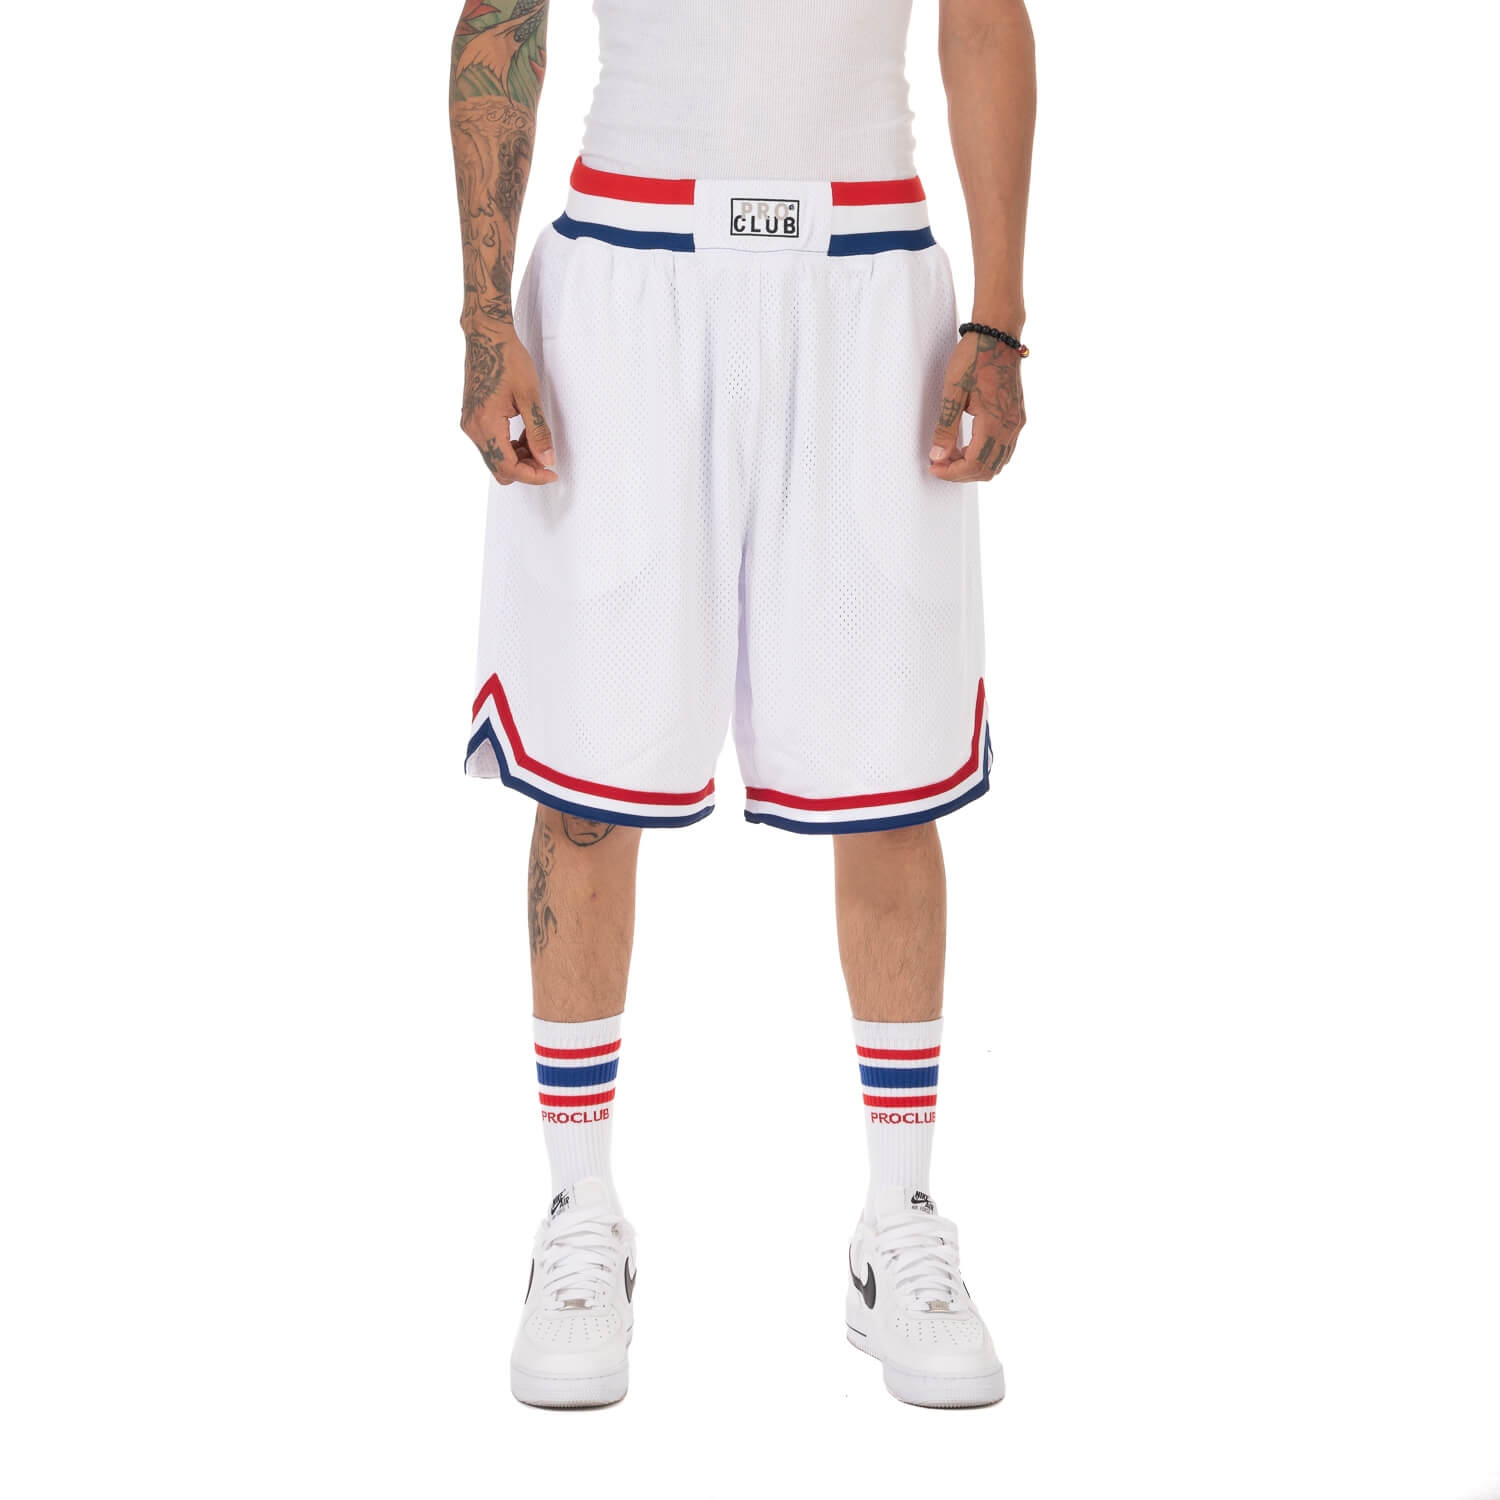 Pro Club Classic Basketball Shorts - White/Red/Blue